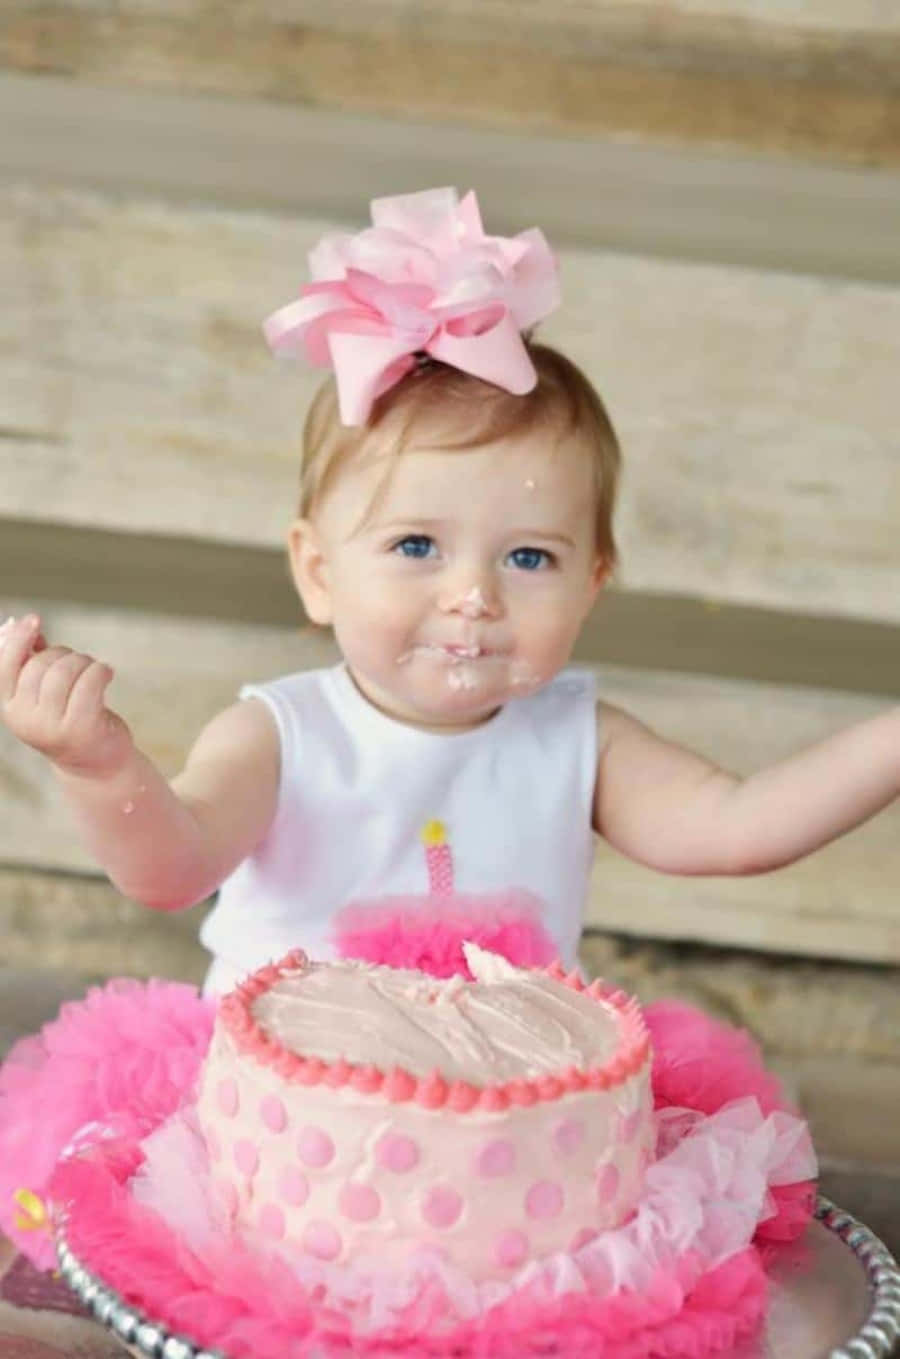 A Baby Girl Is Holding A Pink Cake